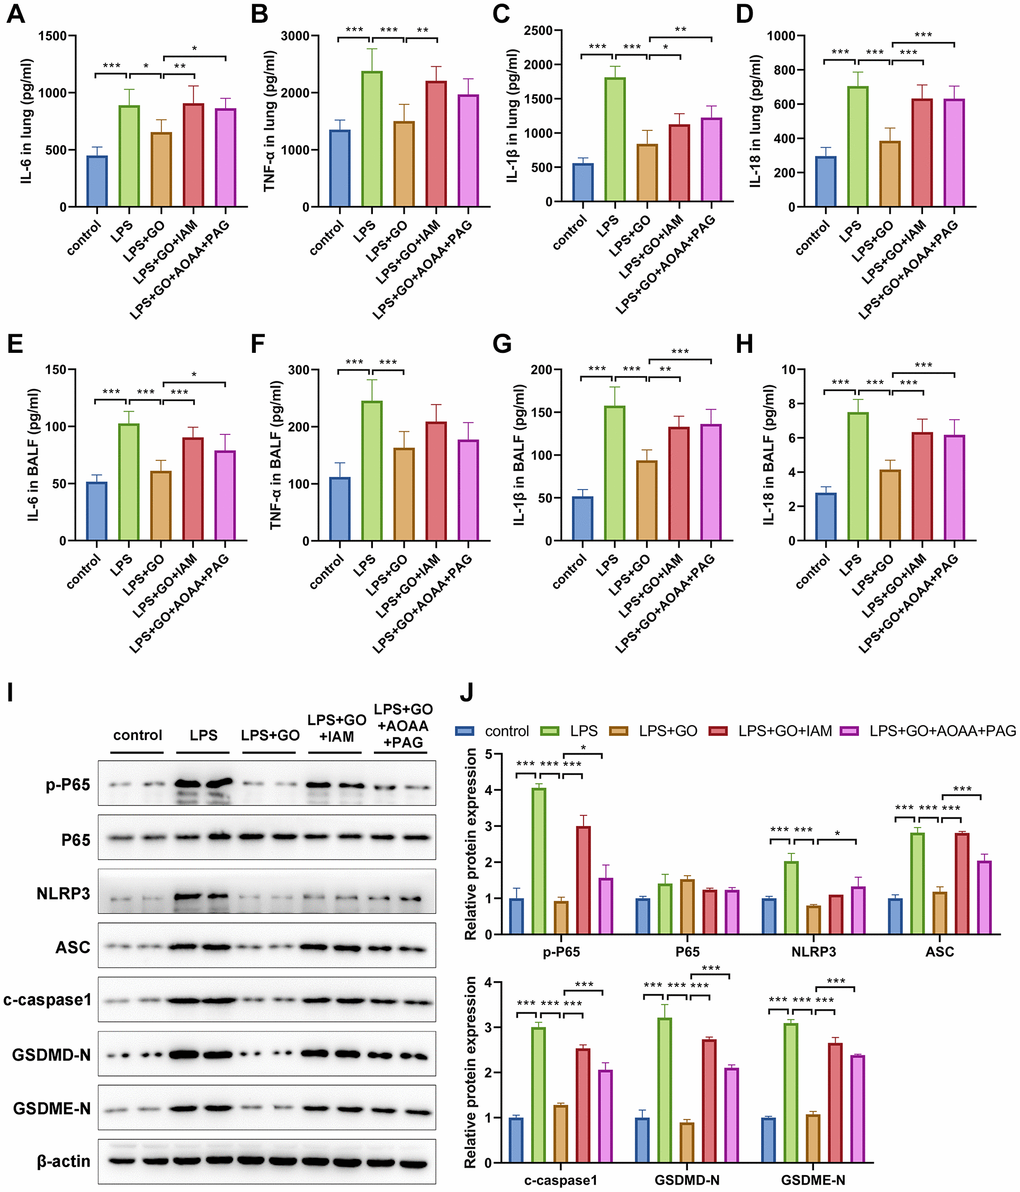 GO inhibits the NF-κB signaling and NLRP3 inflammasome-mediated inflammatory pyroptosis in LPS-induced ALI via the H2S-generating pathway. (A–D) ELISA of the levels of inflammatory cytokines, including TNF-α, IL-6, IL-1β, and IL-18, in lungs. (E–H) ELISA of the levels of secreted inflammatory cytokines, including TNF-α, IL-6, IL-1β, and IL-18, in BALF. (I) Western blotting to detect the protein expression levels of p-p65, p65, NLRP3, ASC, c-caspase 1, and apoptotic markers in lungs. (J) The grayscale values of the bands in the image were normalized to β-actin and analyzed using ImageJ software. Data are expressed as the means ± SD. Student’s t-test, *p **p ***p 